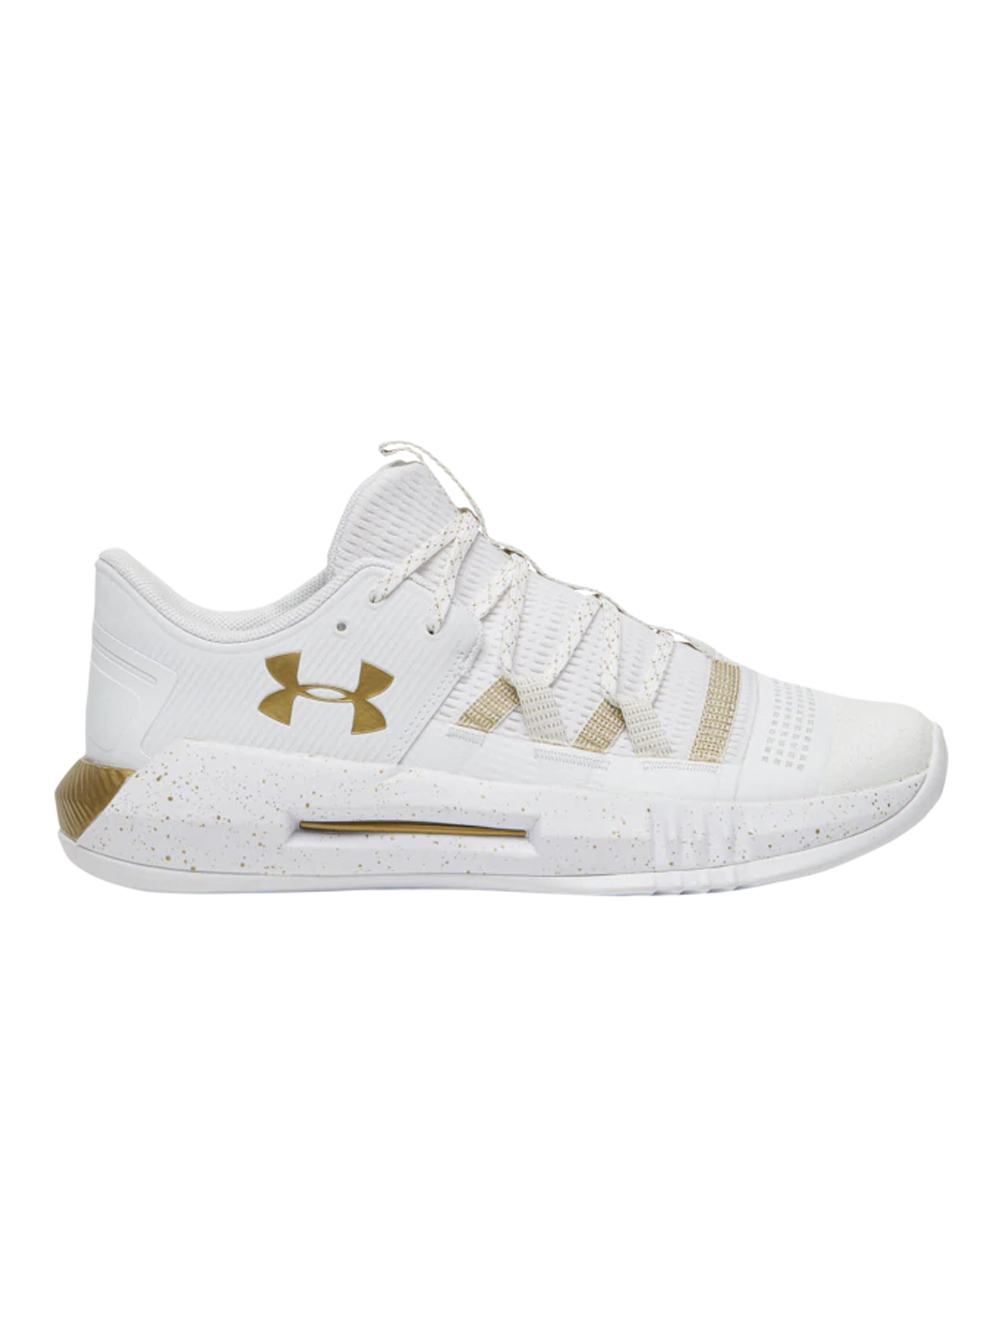 under armour shoes white and gold